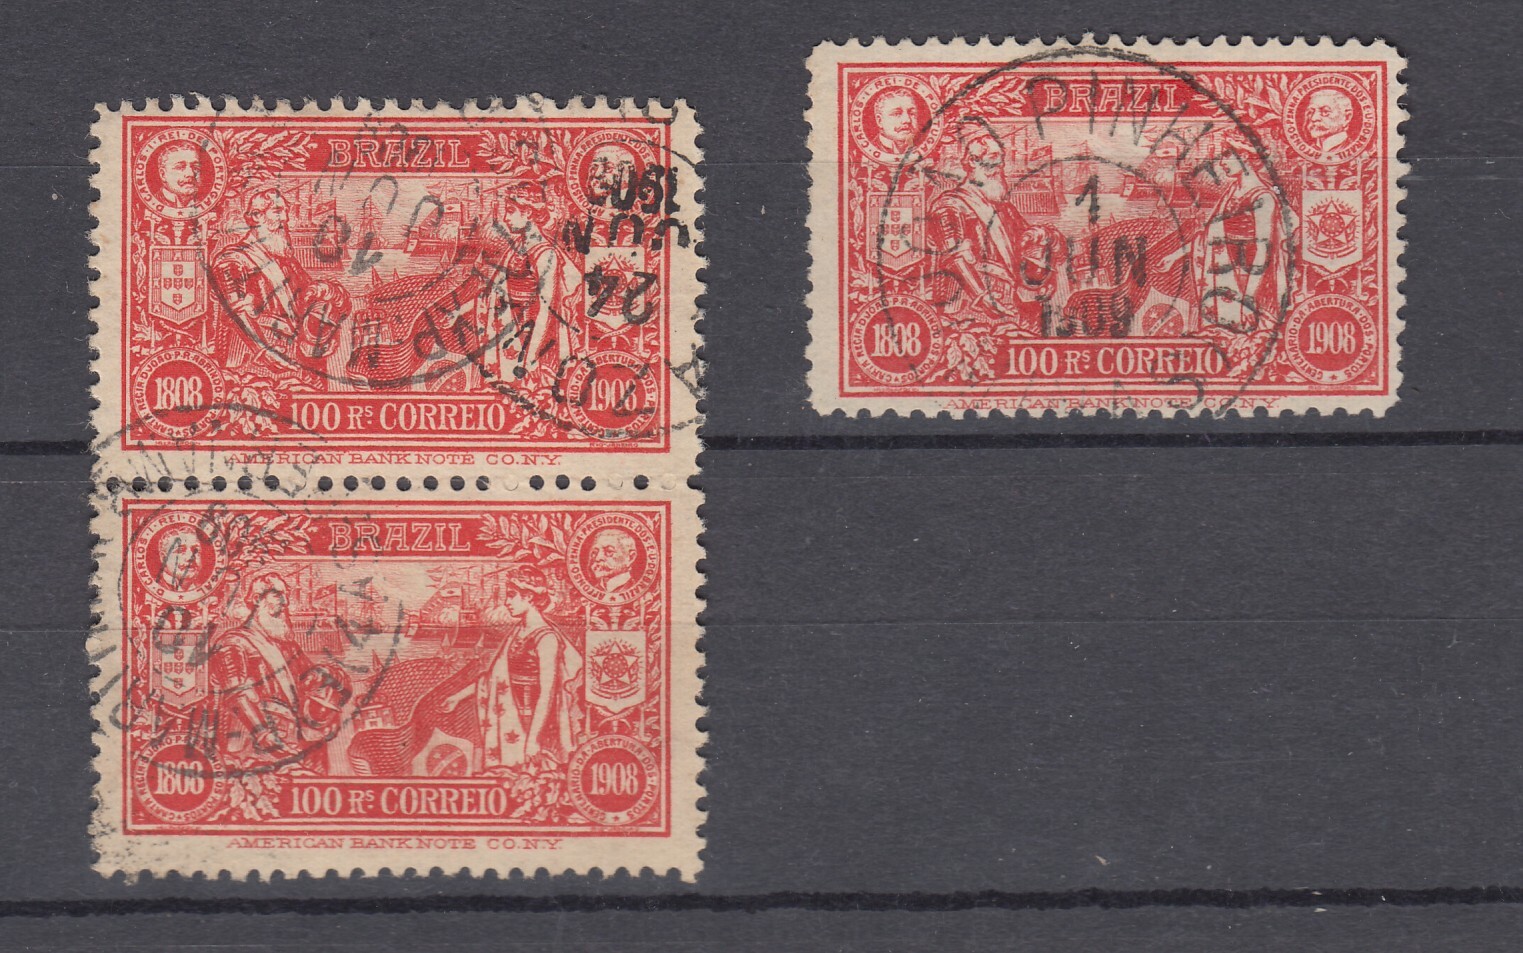 J28585 1908 brazil pair + 1 son used #190 people | Central & South